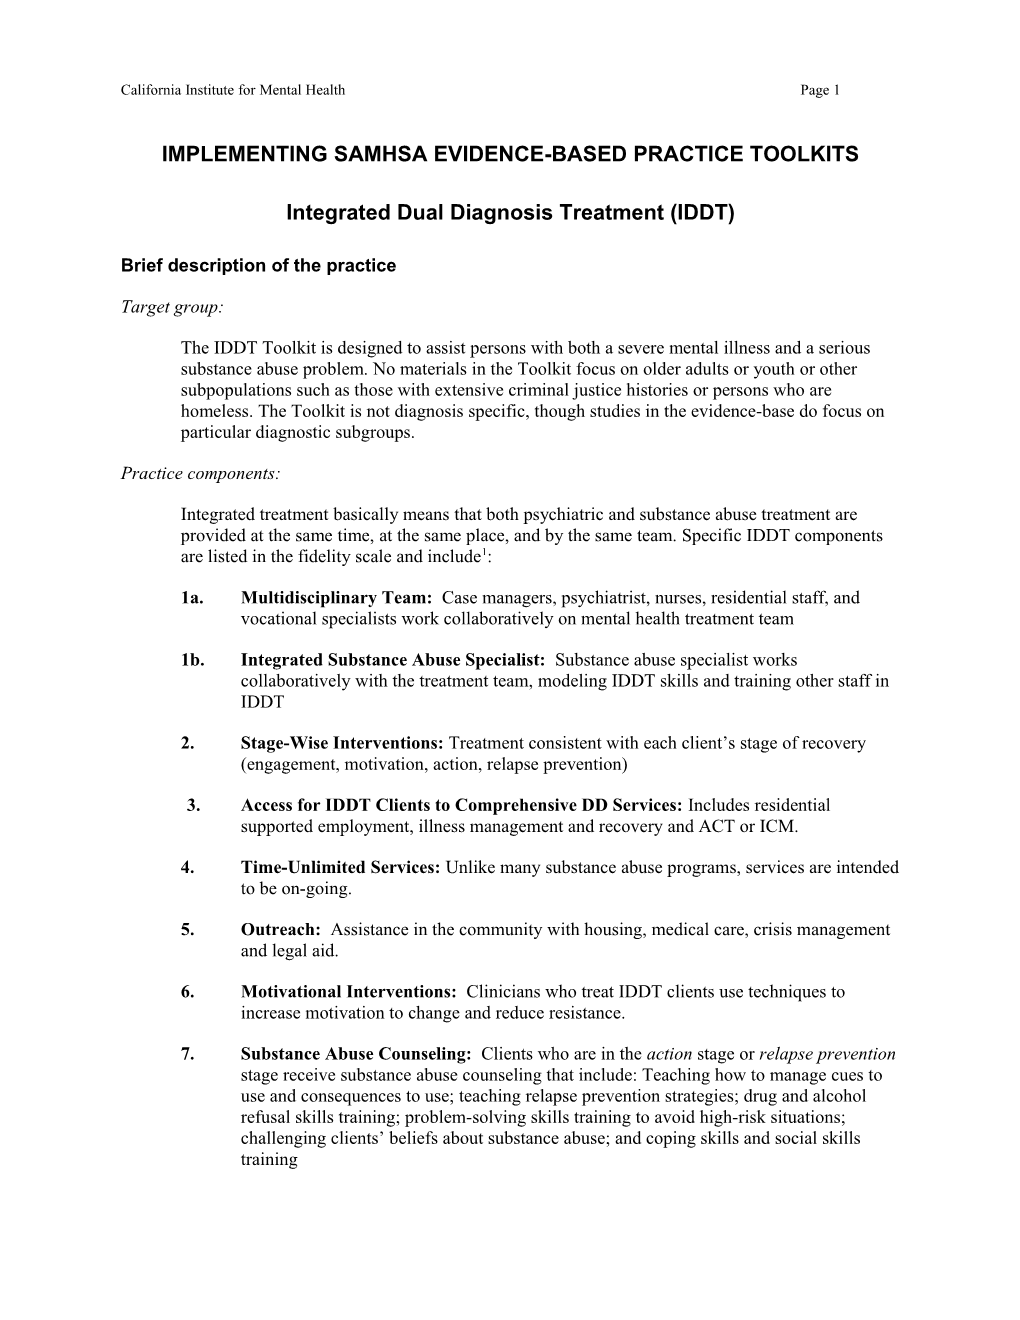 Implementing Samhsa Evidence-Based Practice Toolkits s1